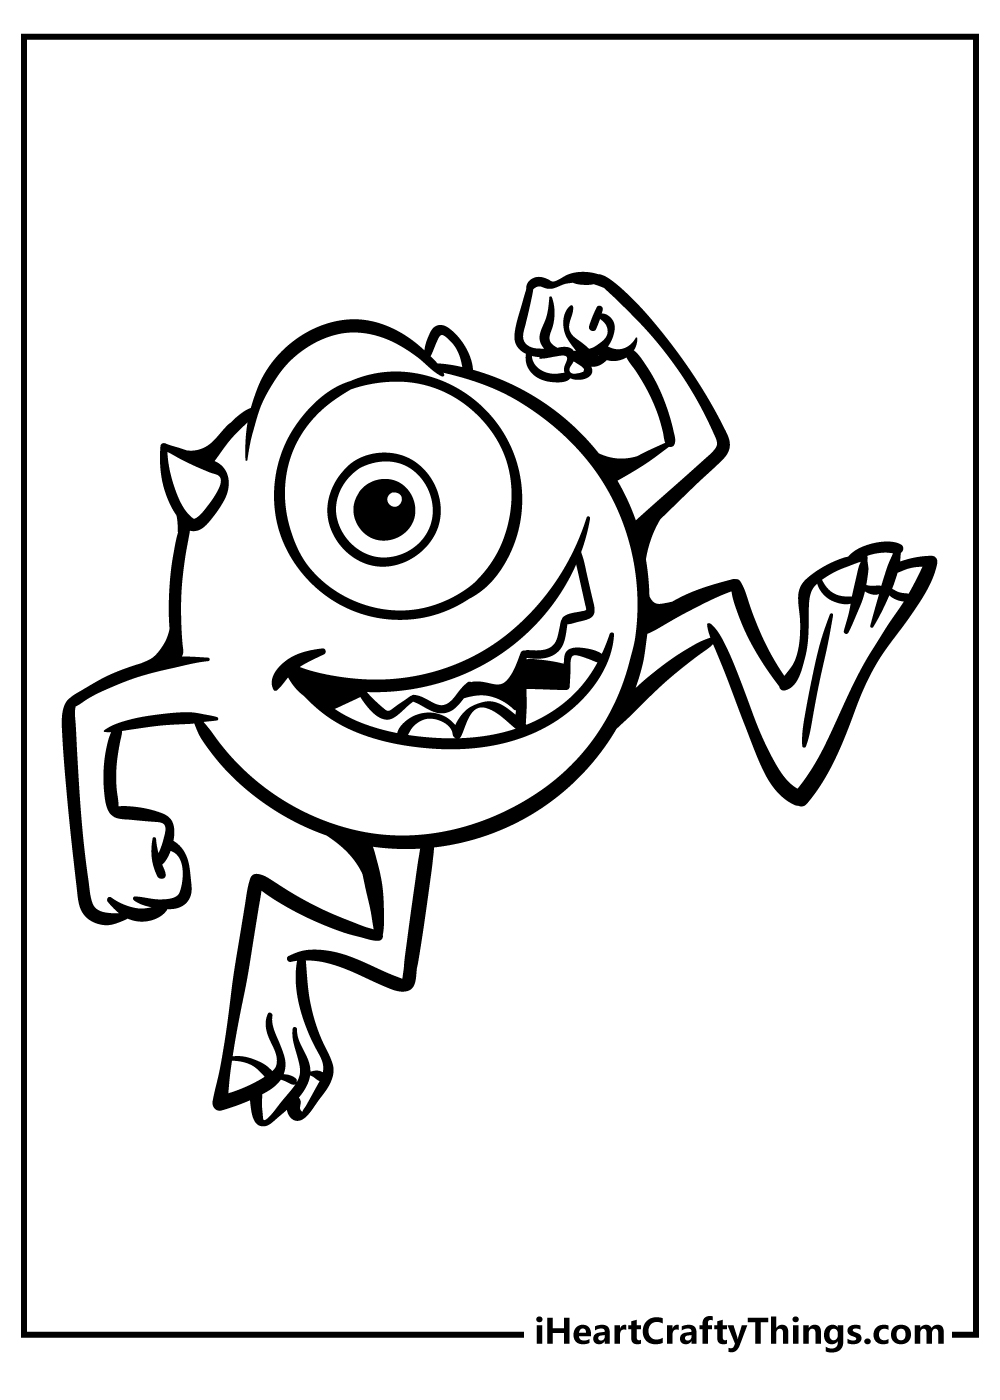 Monsters Inc. Coloring Sheet for children free download